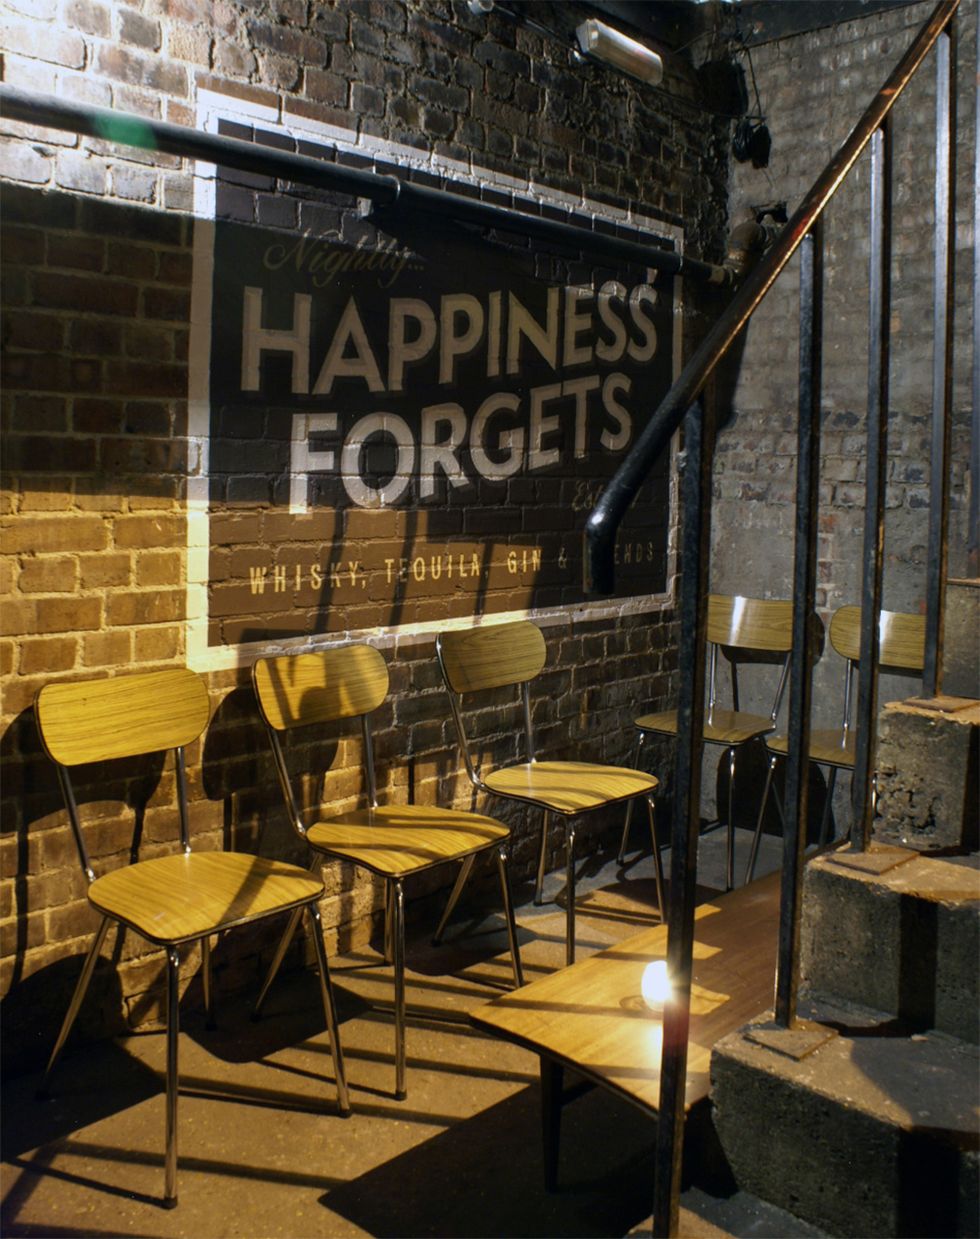 World's Best Bar Awards 2016, Happiness Forgets, London